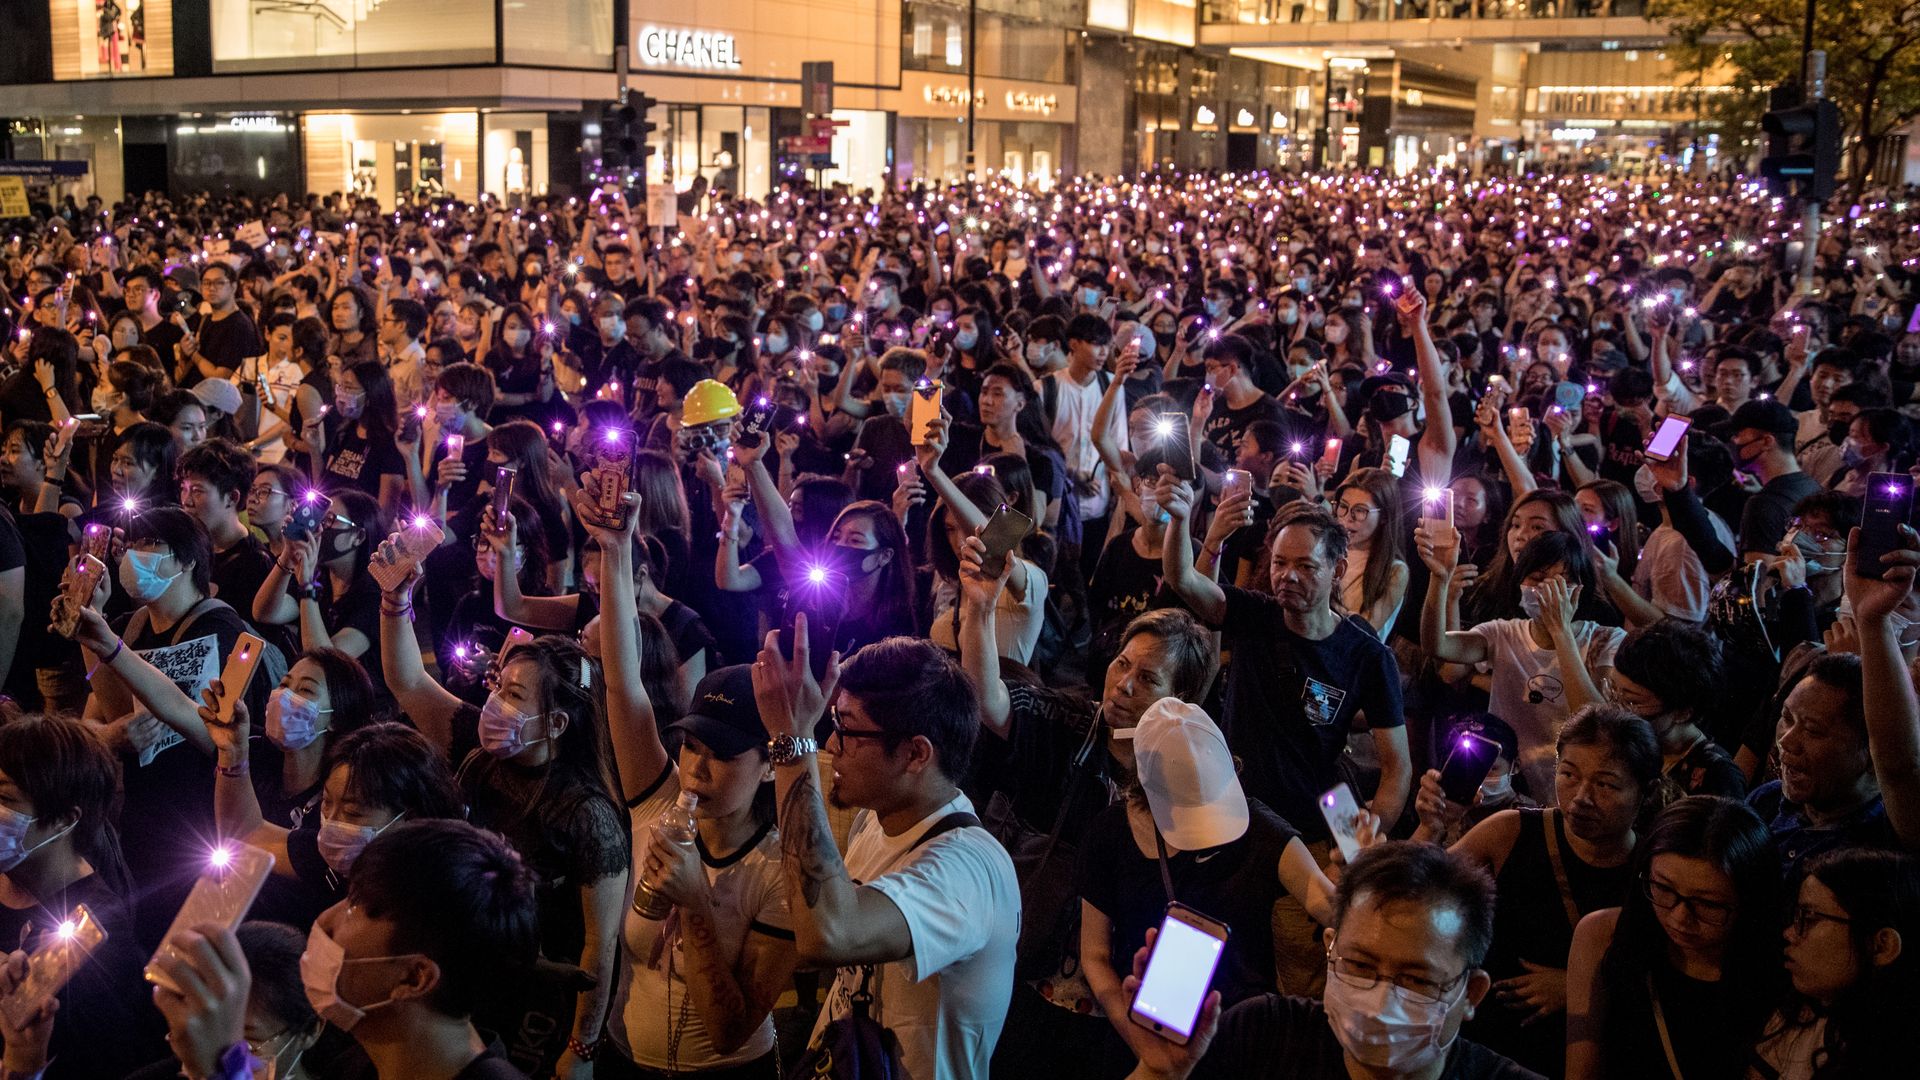  Protesters wave their phones in the air during a #MeToo rally against police sexual harassment on August 30